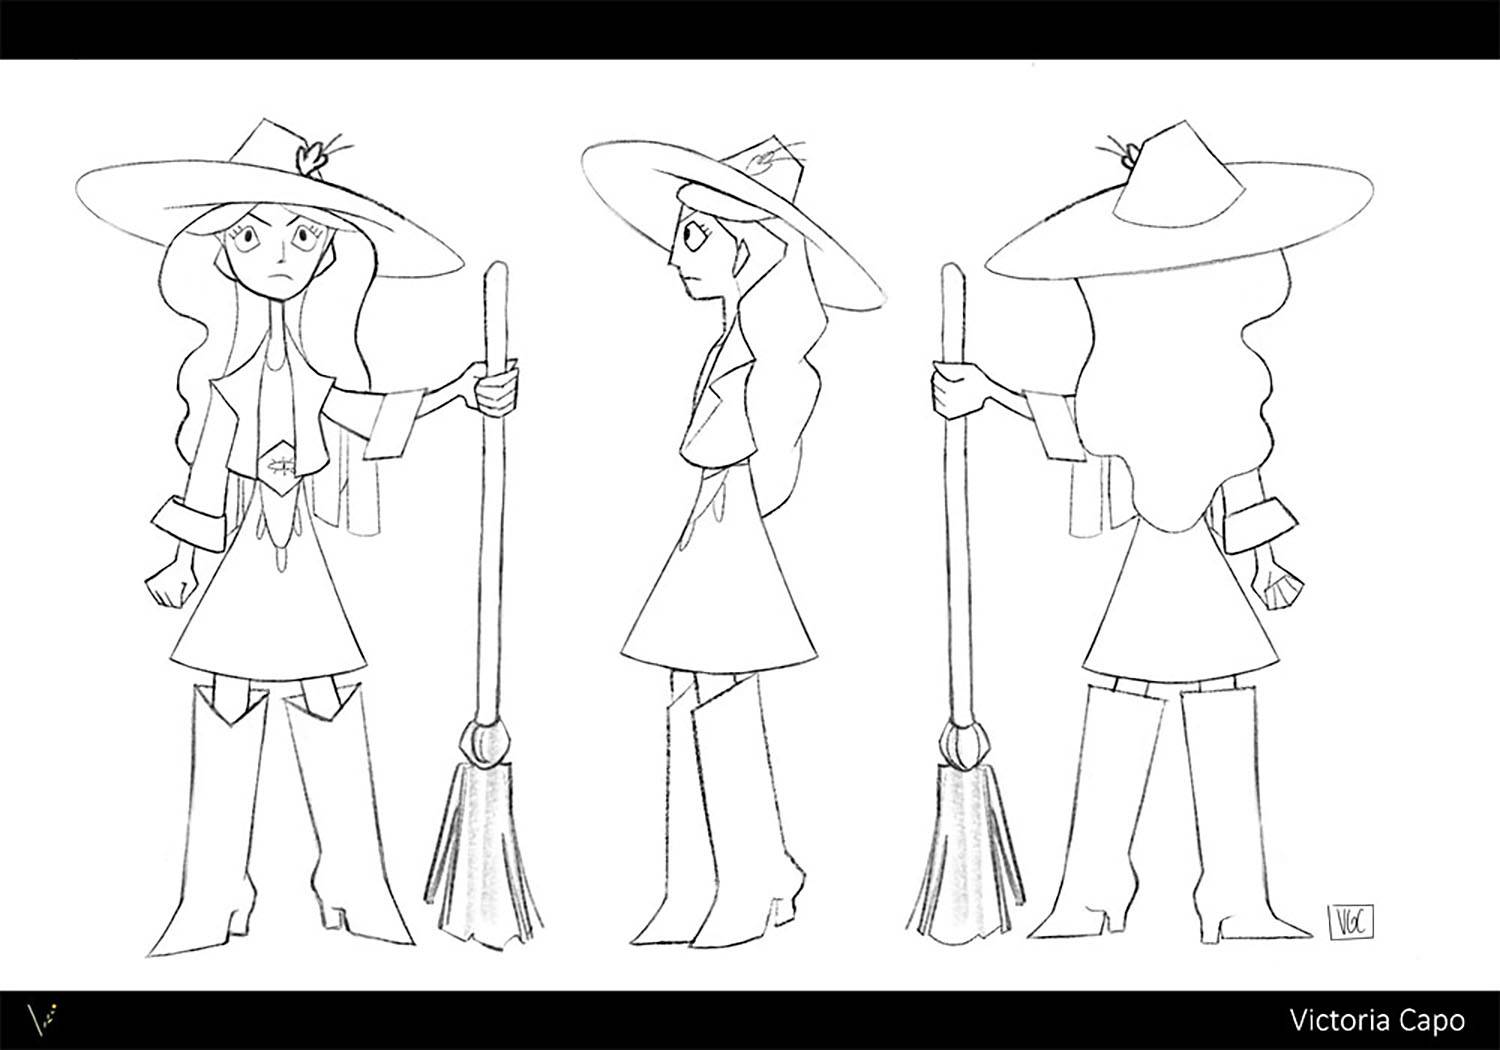 Character turn-around of a Southern witch.